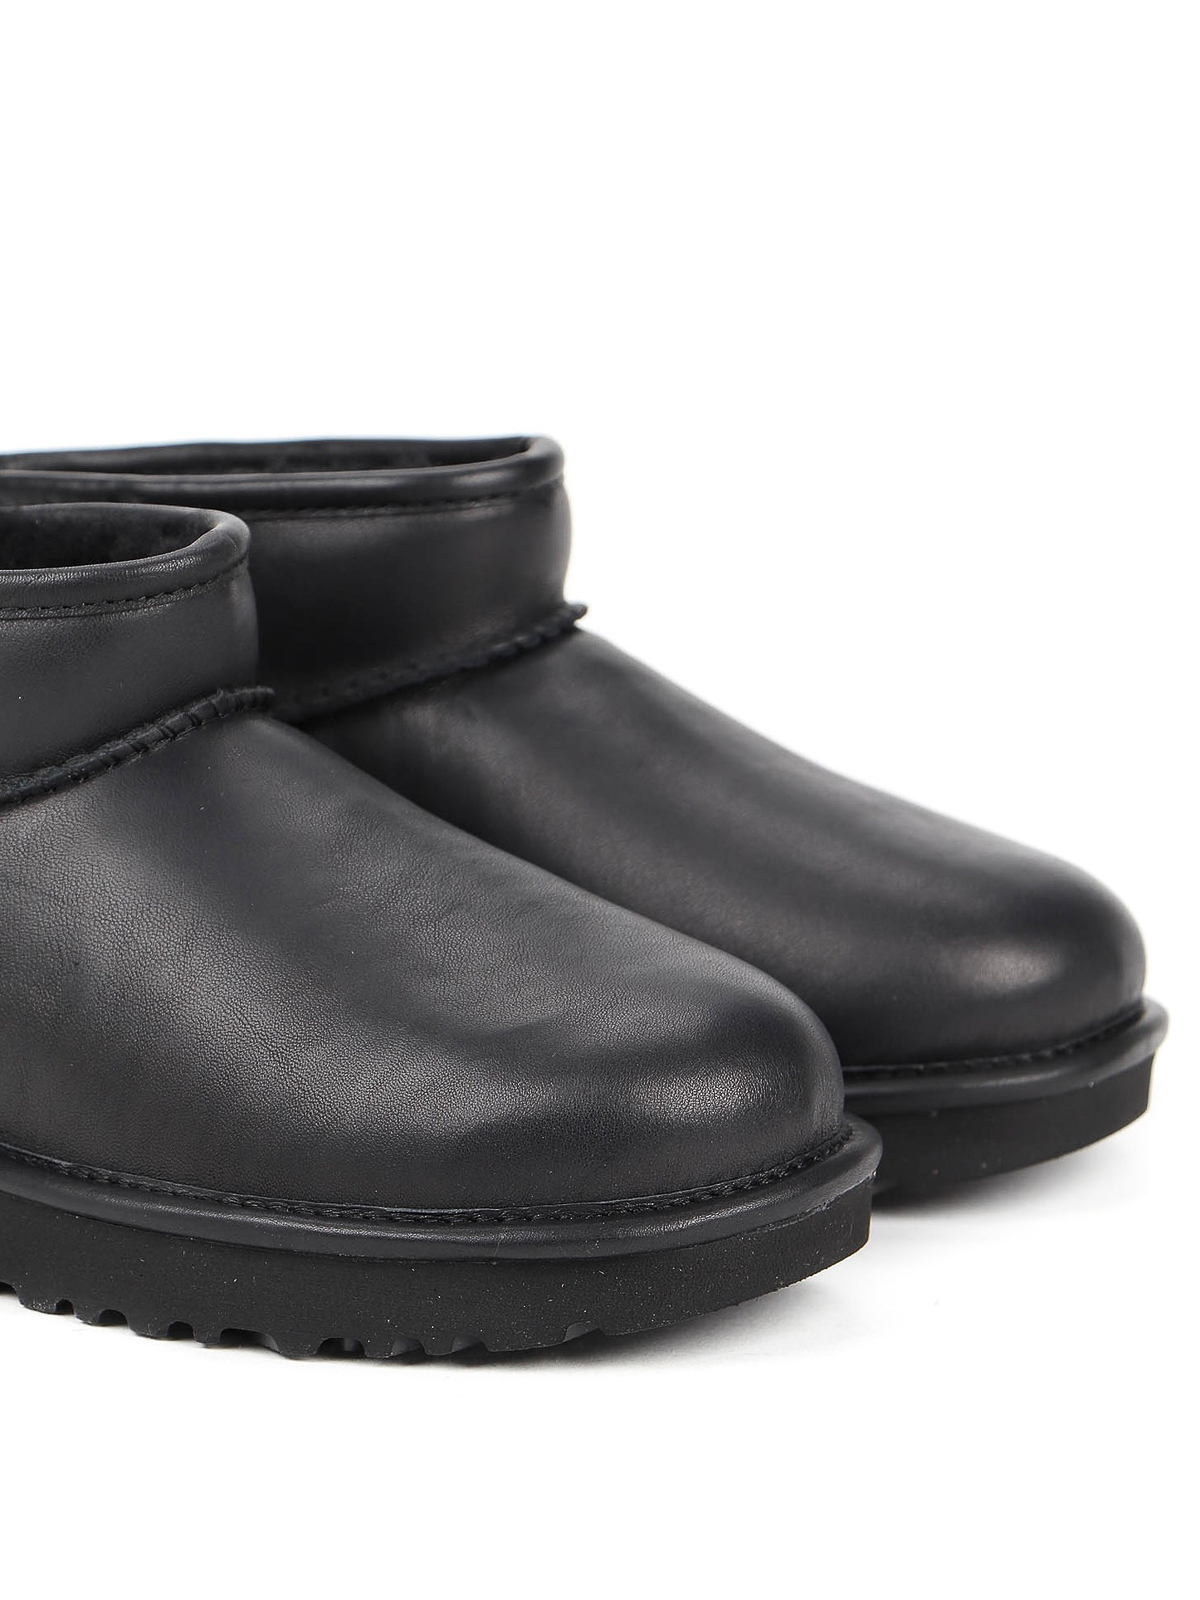 Ugg - Classic Ultra Mini ankle boots 